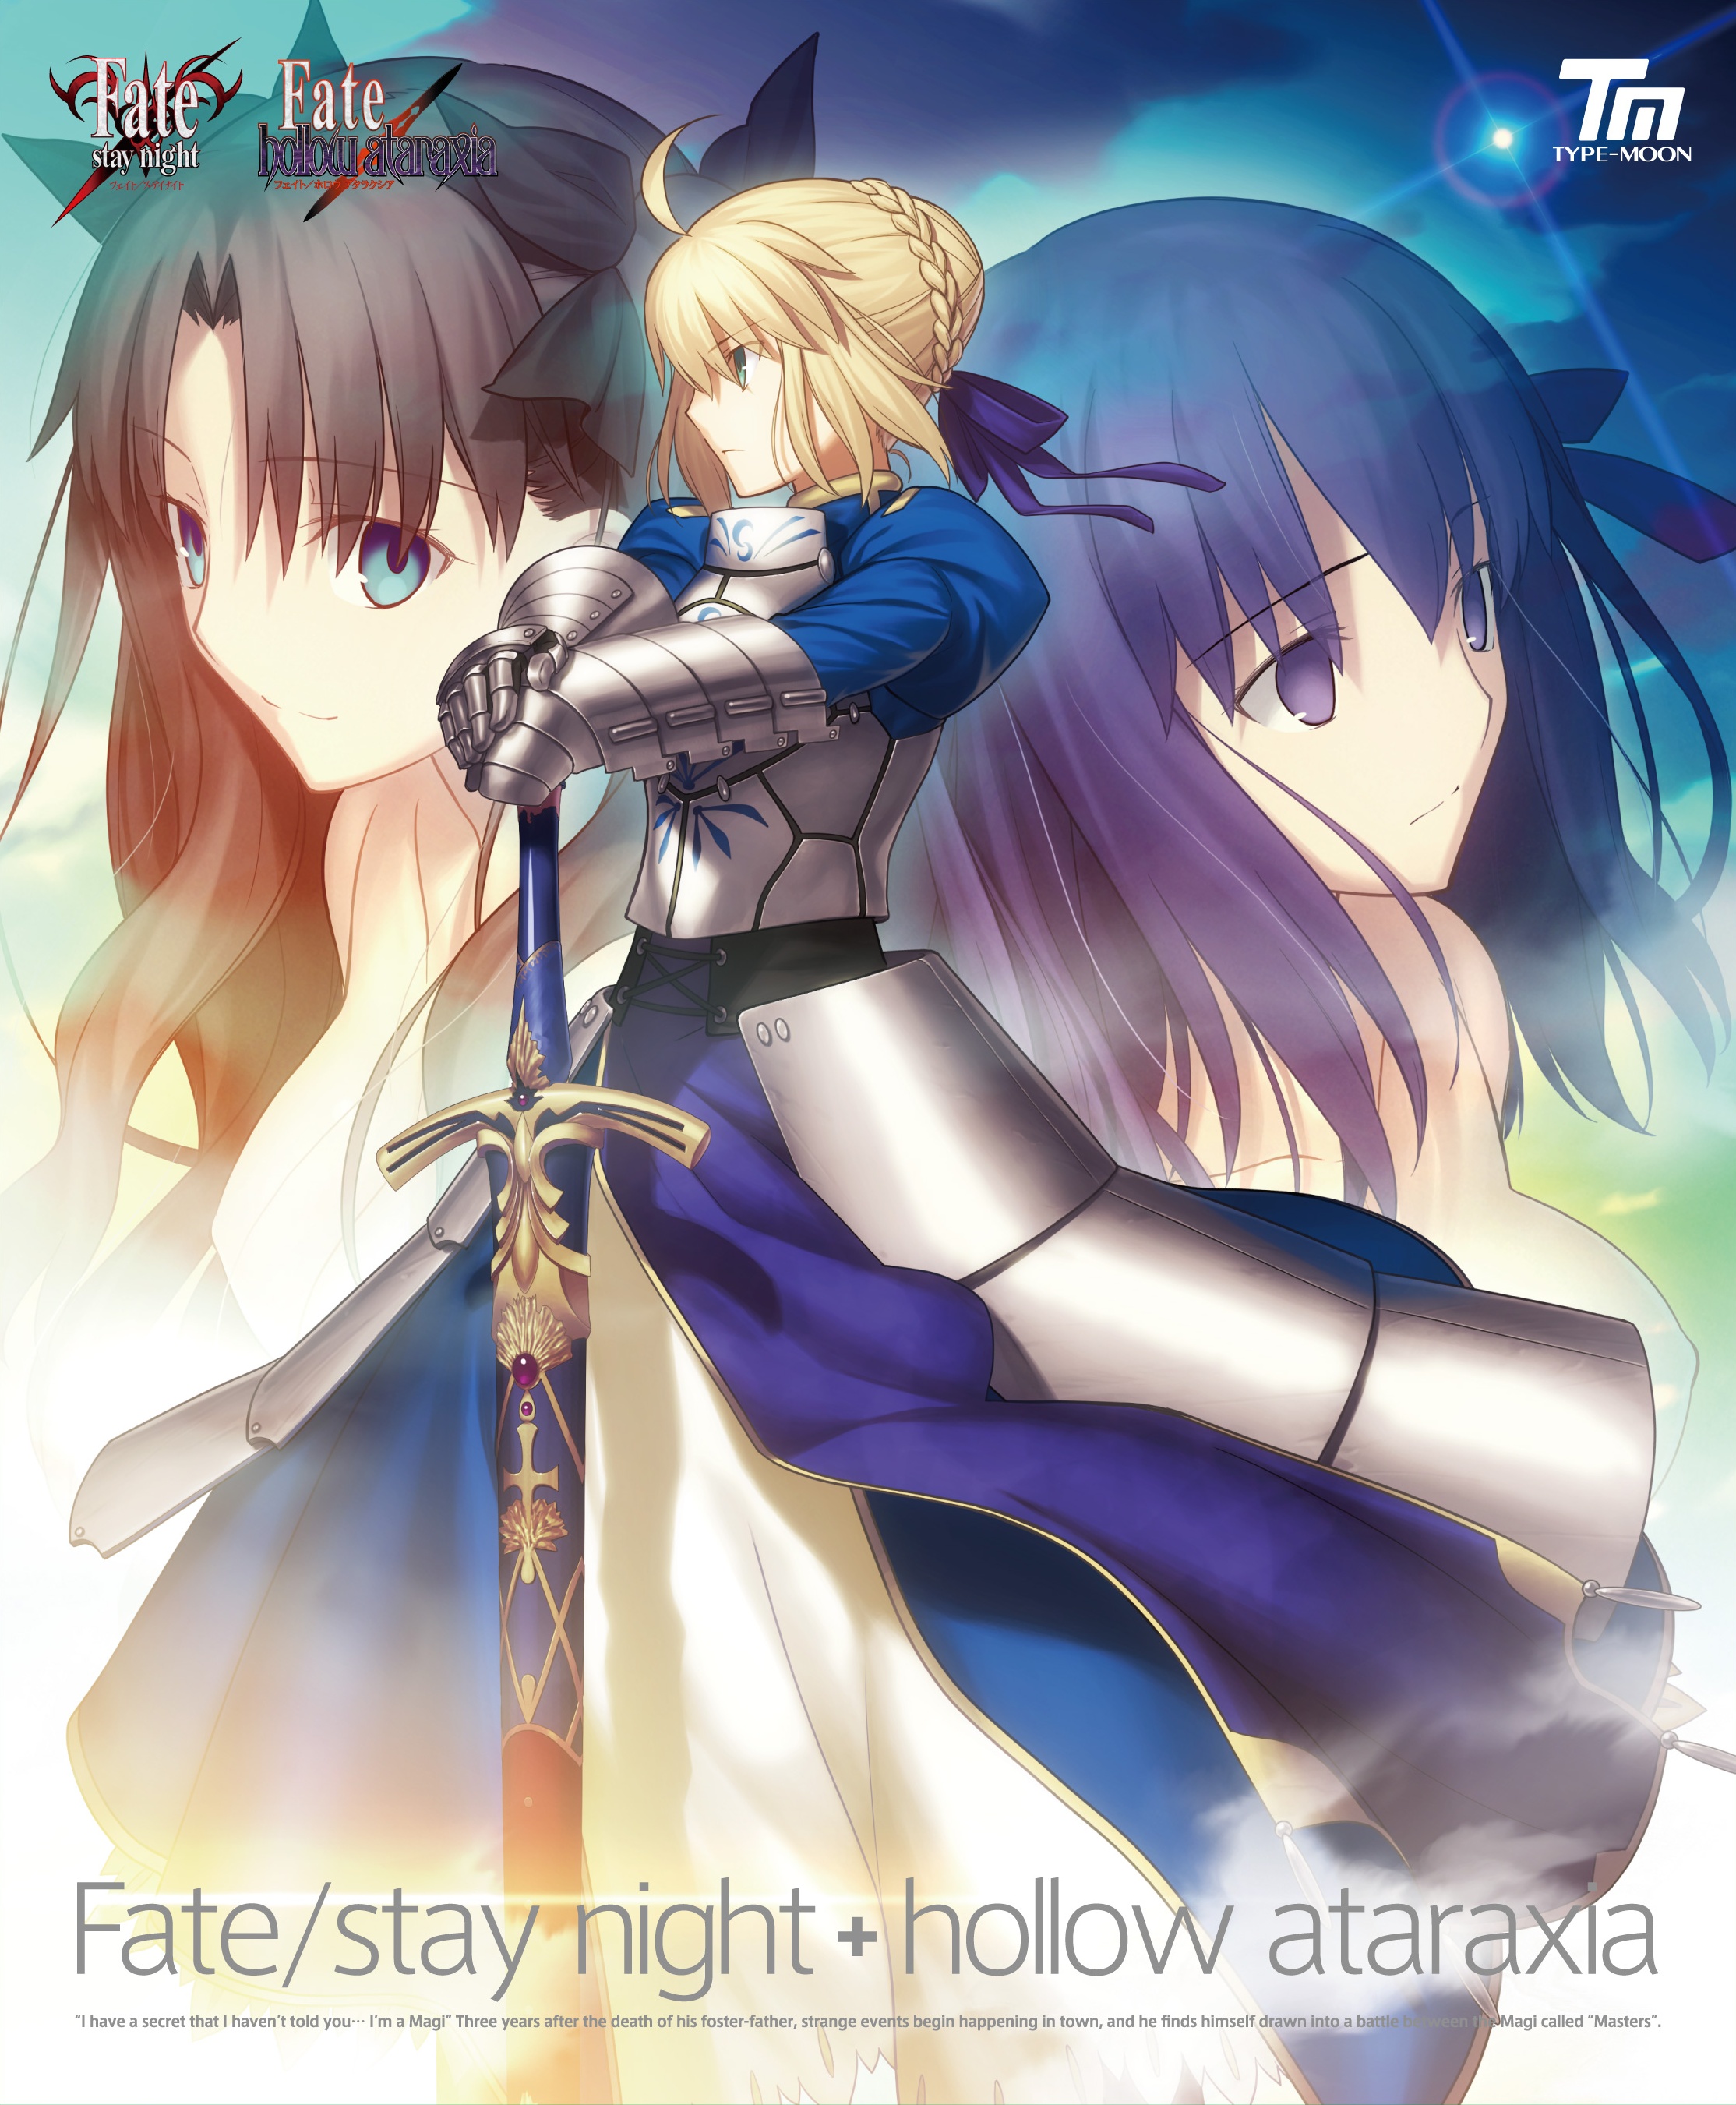 is the regular fate stay night visual novel 18+?